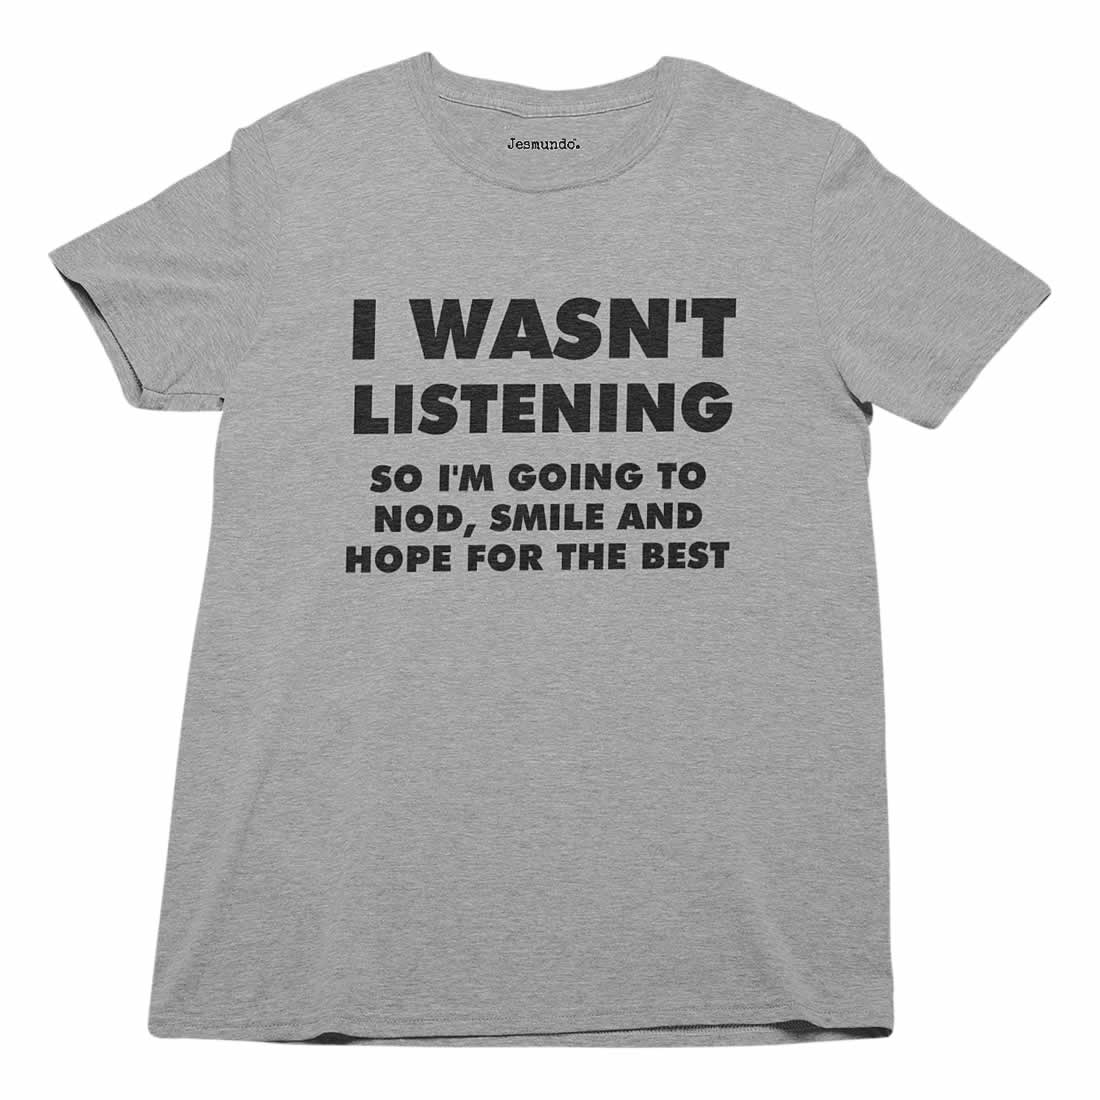 I Wasn't Listening, So I'm Going To Smile, Nod And Hope For The Best T Shirt